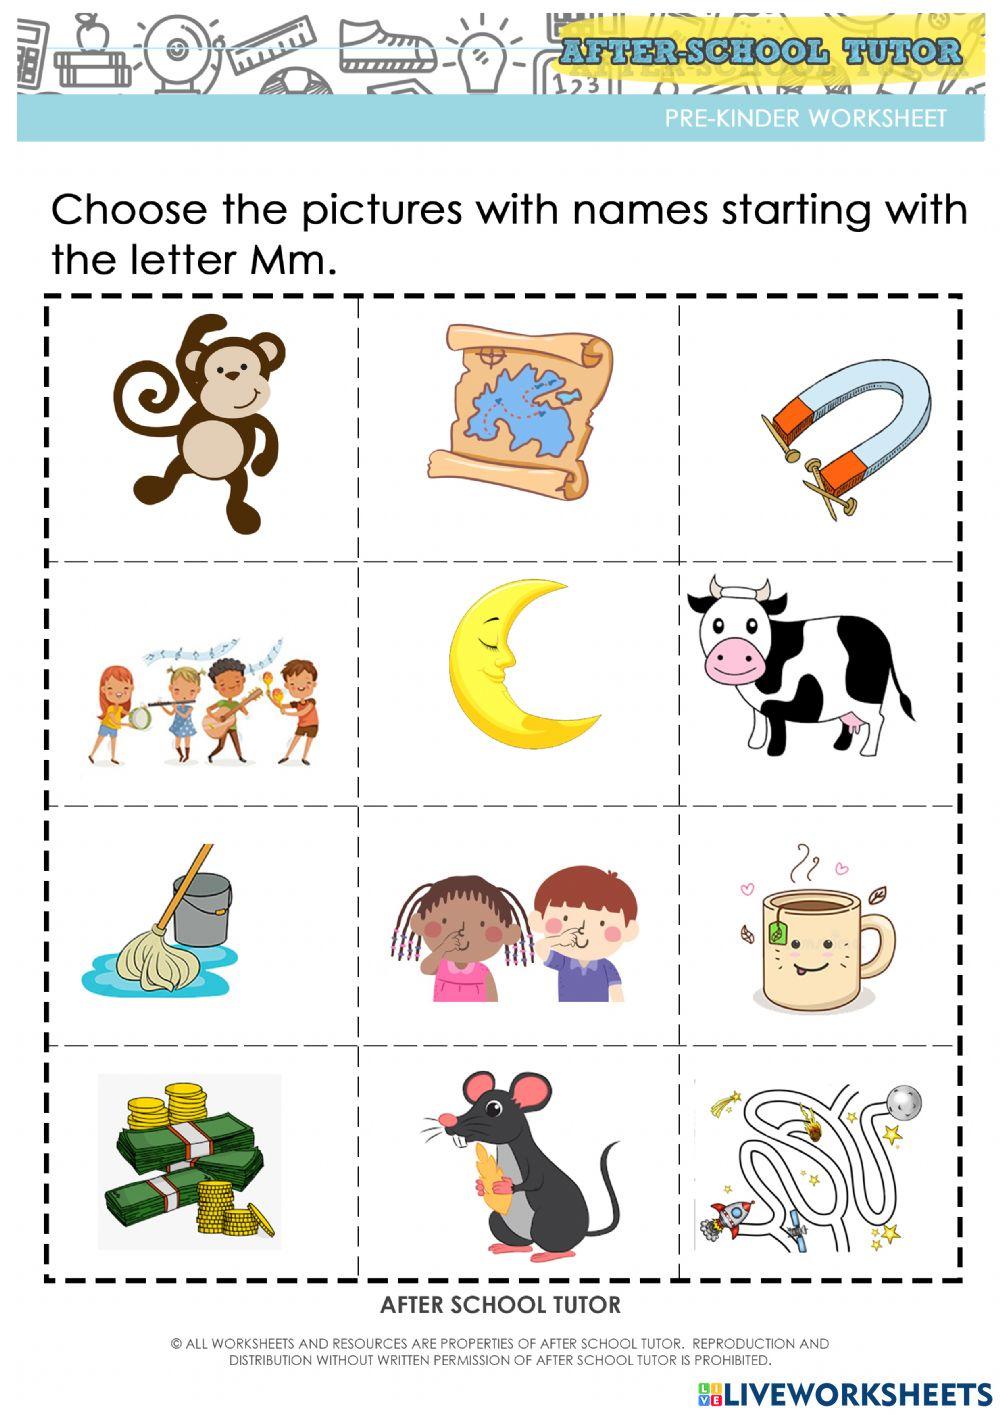 Recognizing words that begin with the letter M